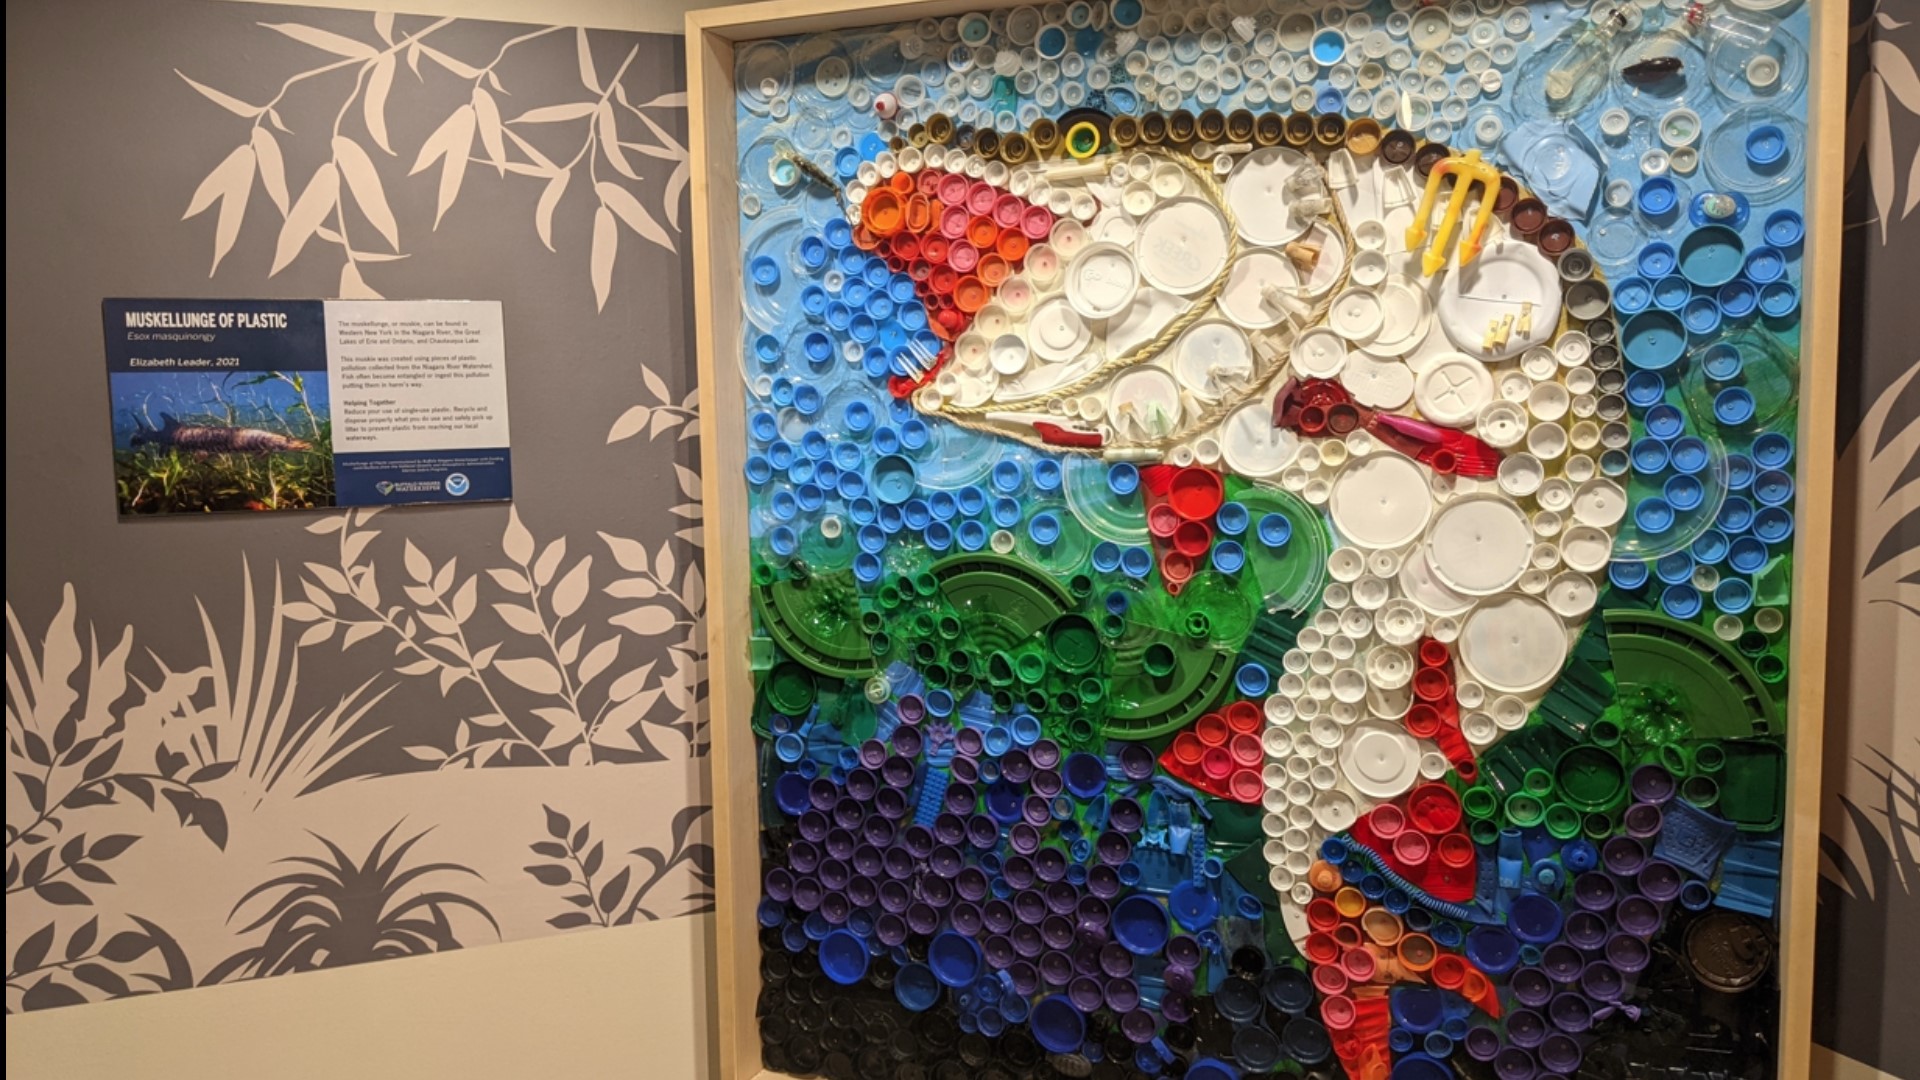 The two permanent art exhibits were created out of plastic pollution trash to comment on this type of pollution in freshwater habitats.